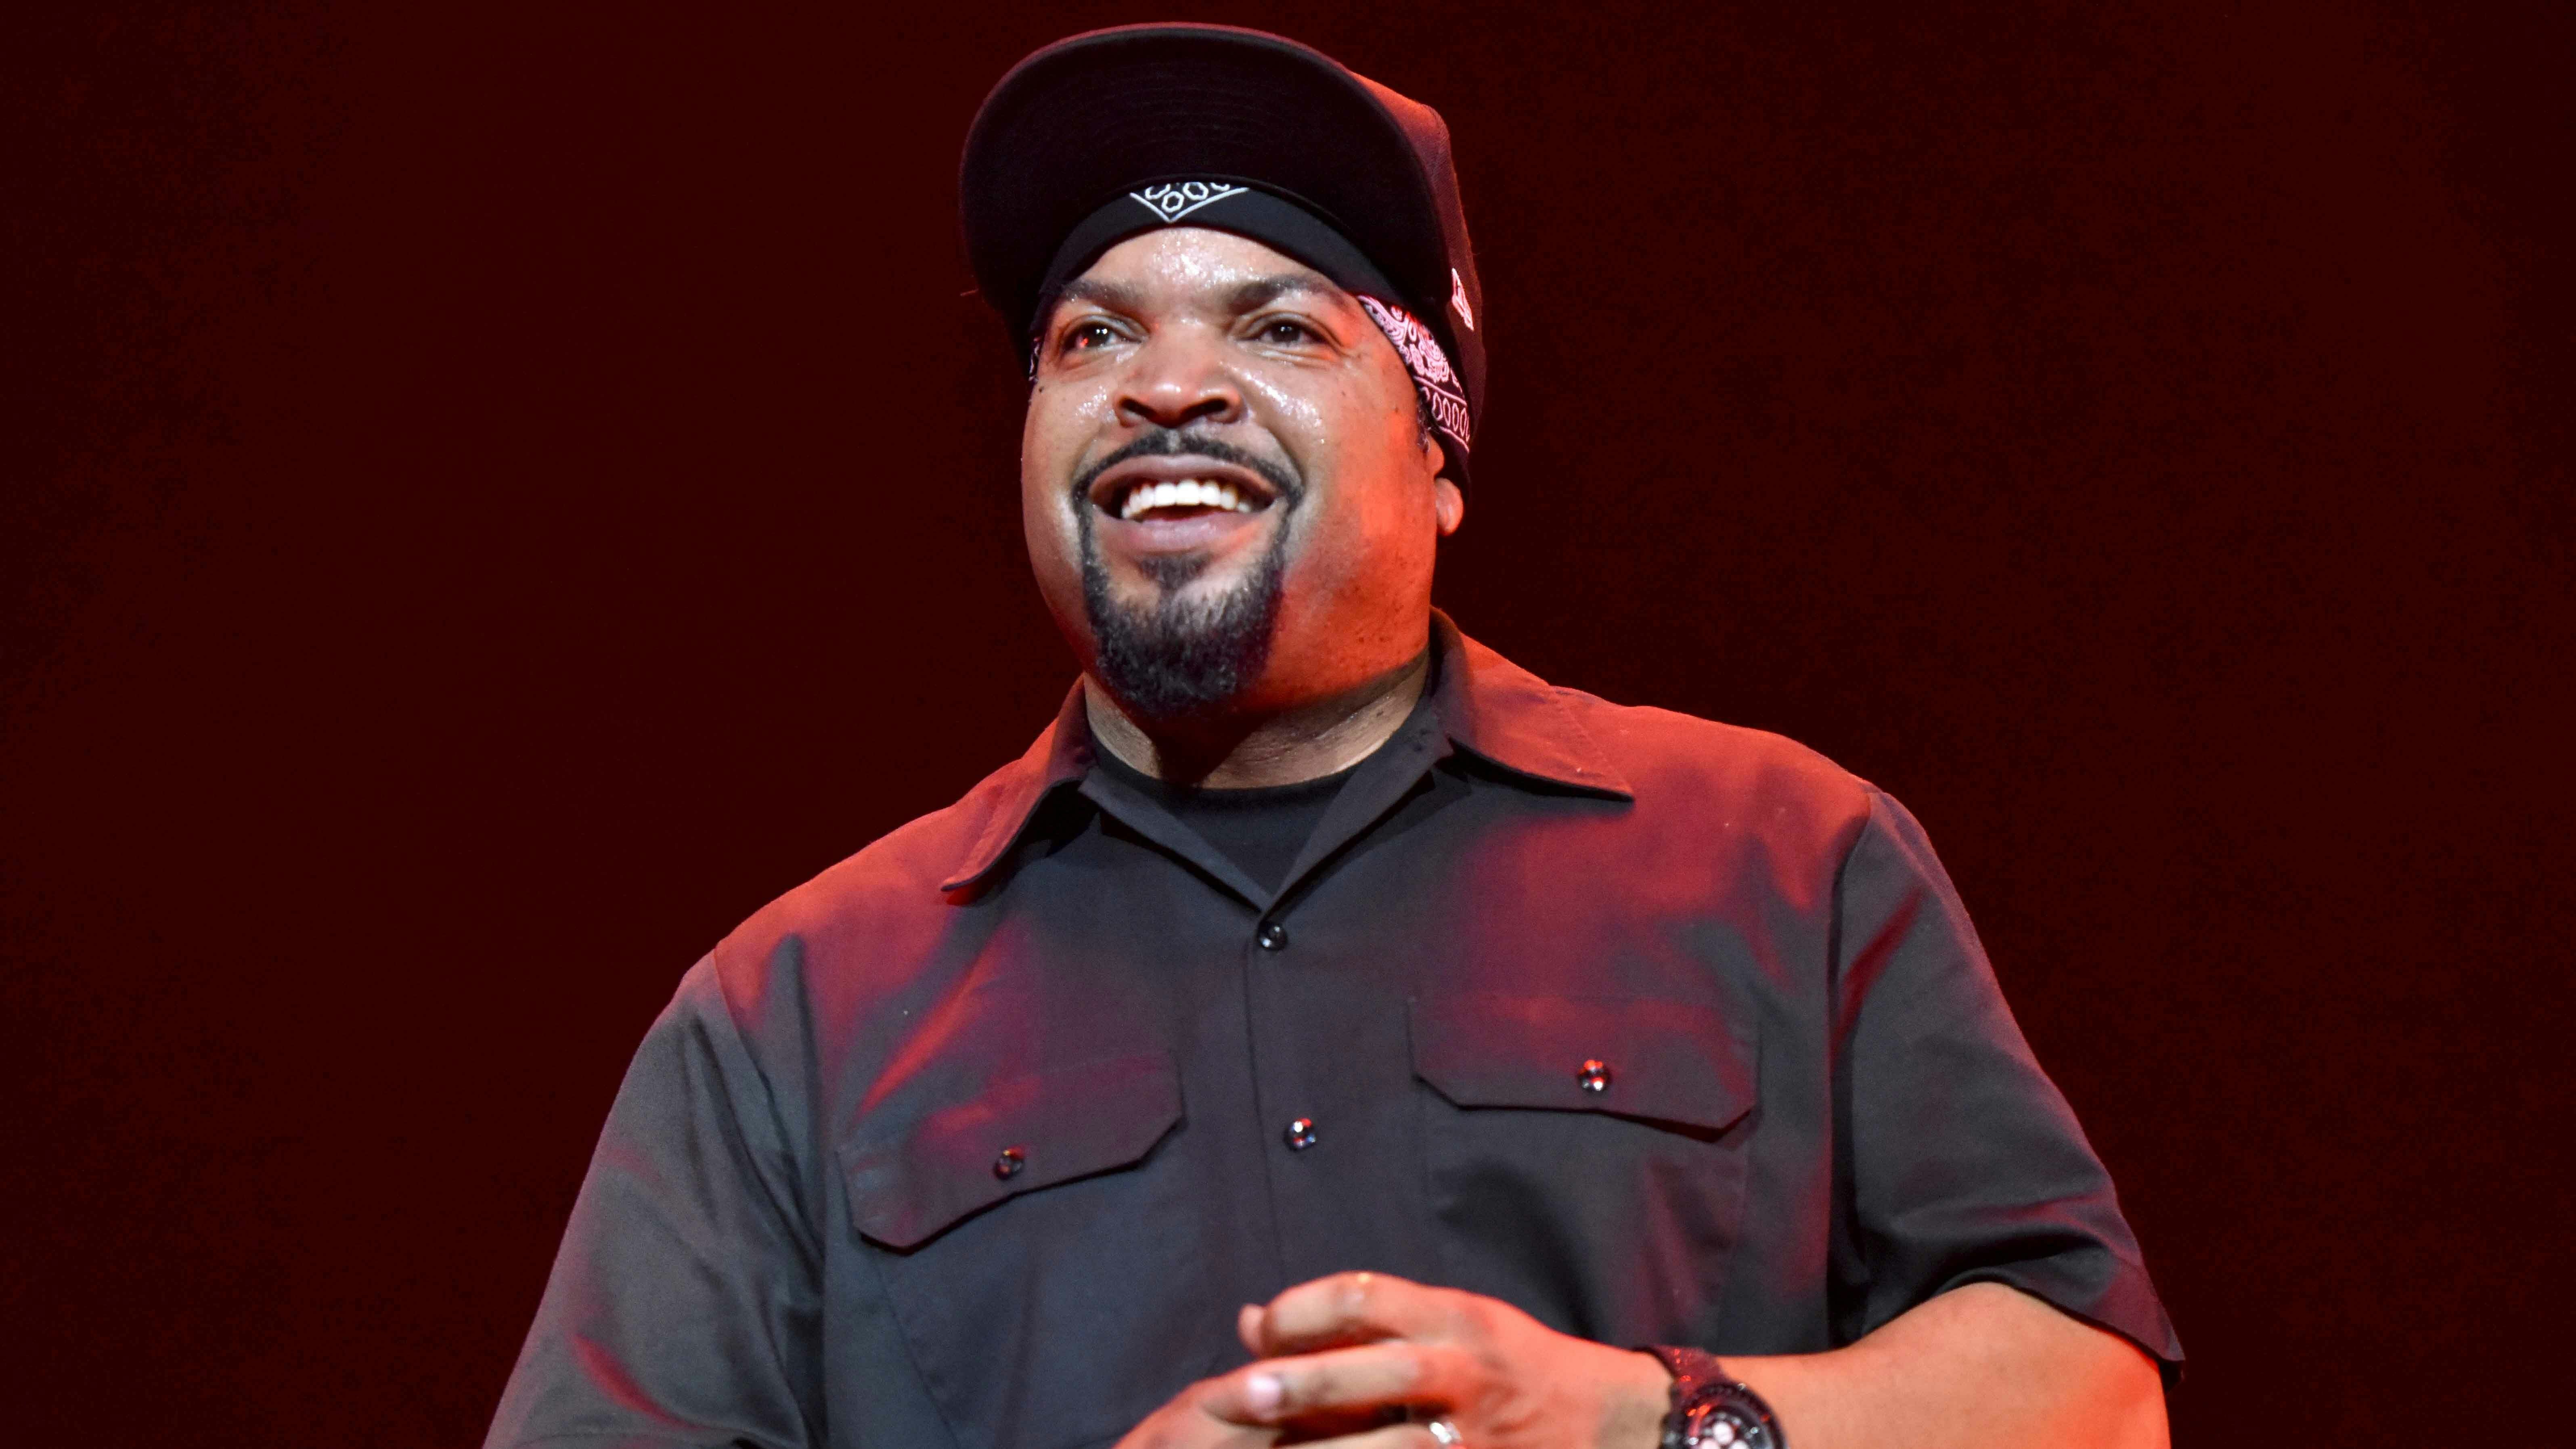 Rapper Ice Cube performs onstage during the Ice Cube, Kendrick Lamar, Snoop Dogg, Schoolboy Q, Ab-Soul, Jay Rock concert at Staples Center in Los Angeles, California.